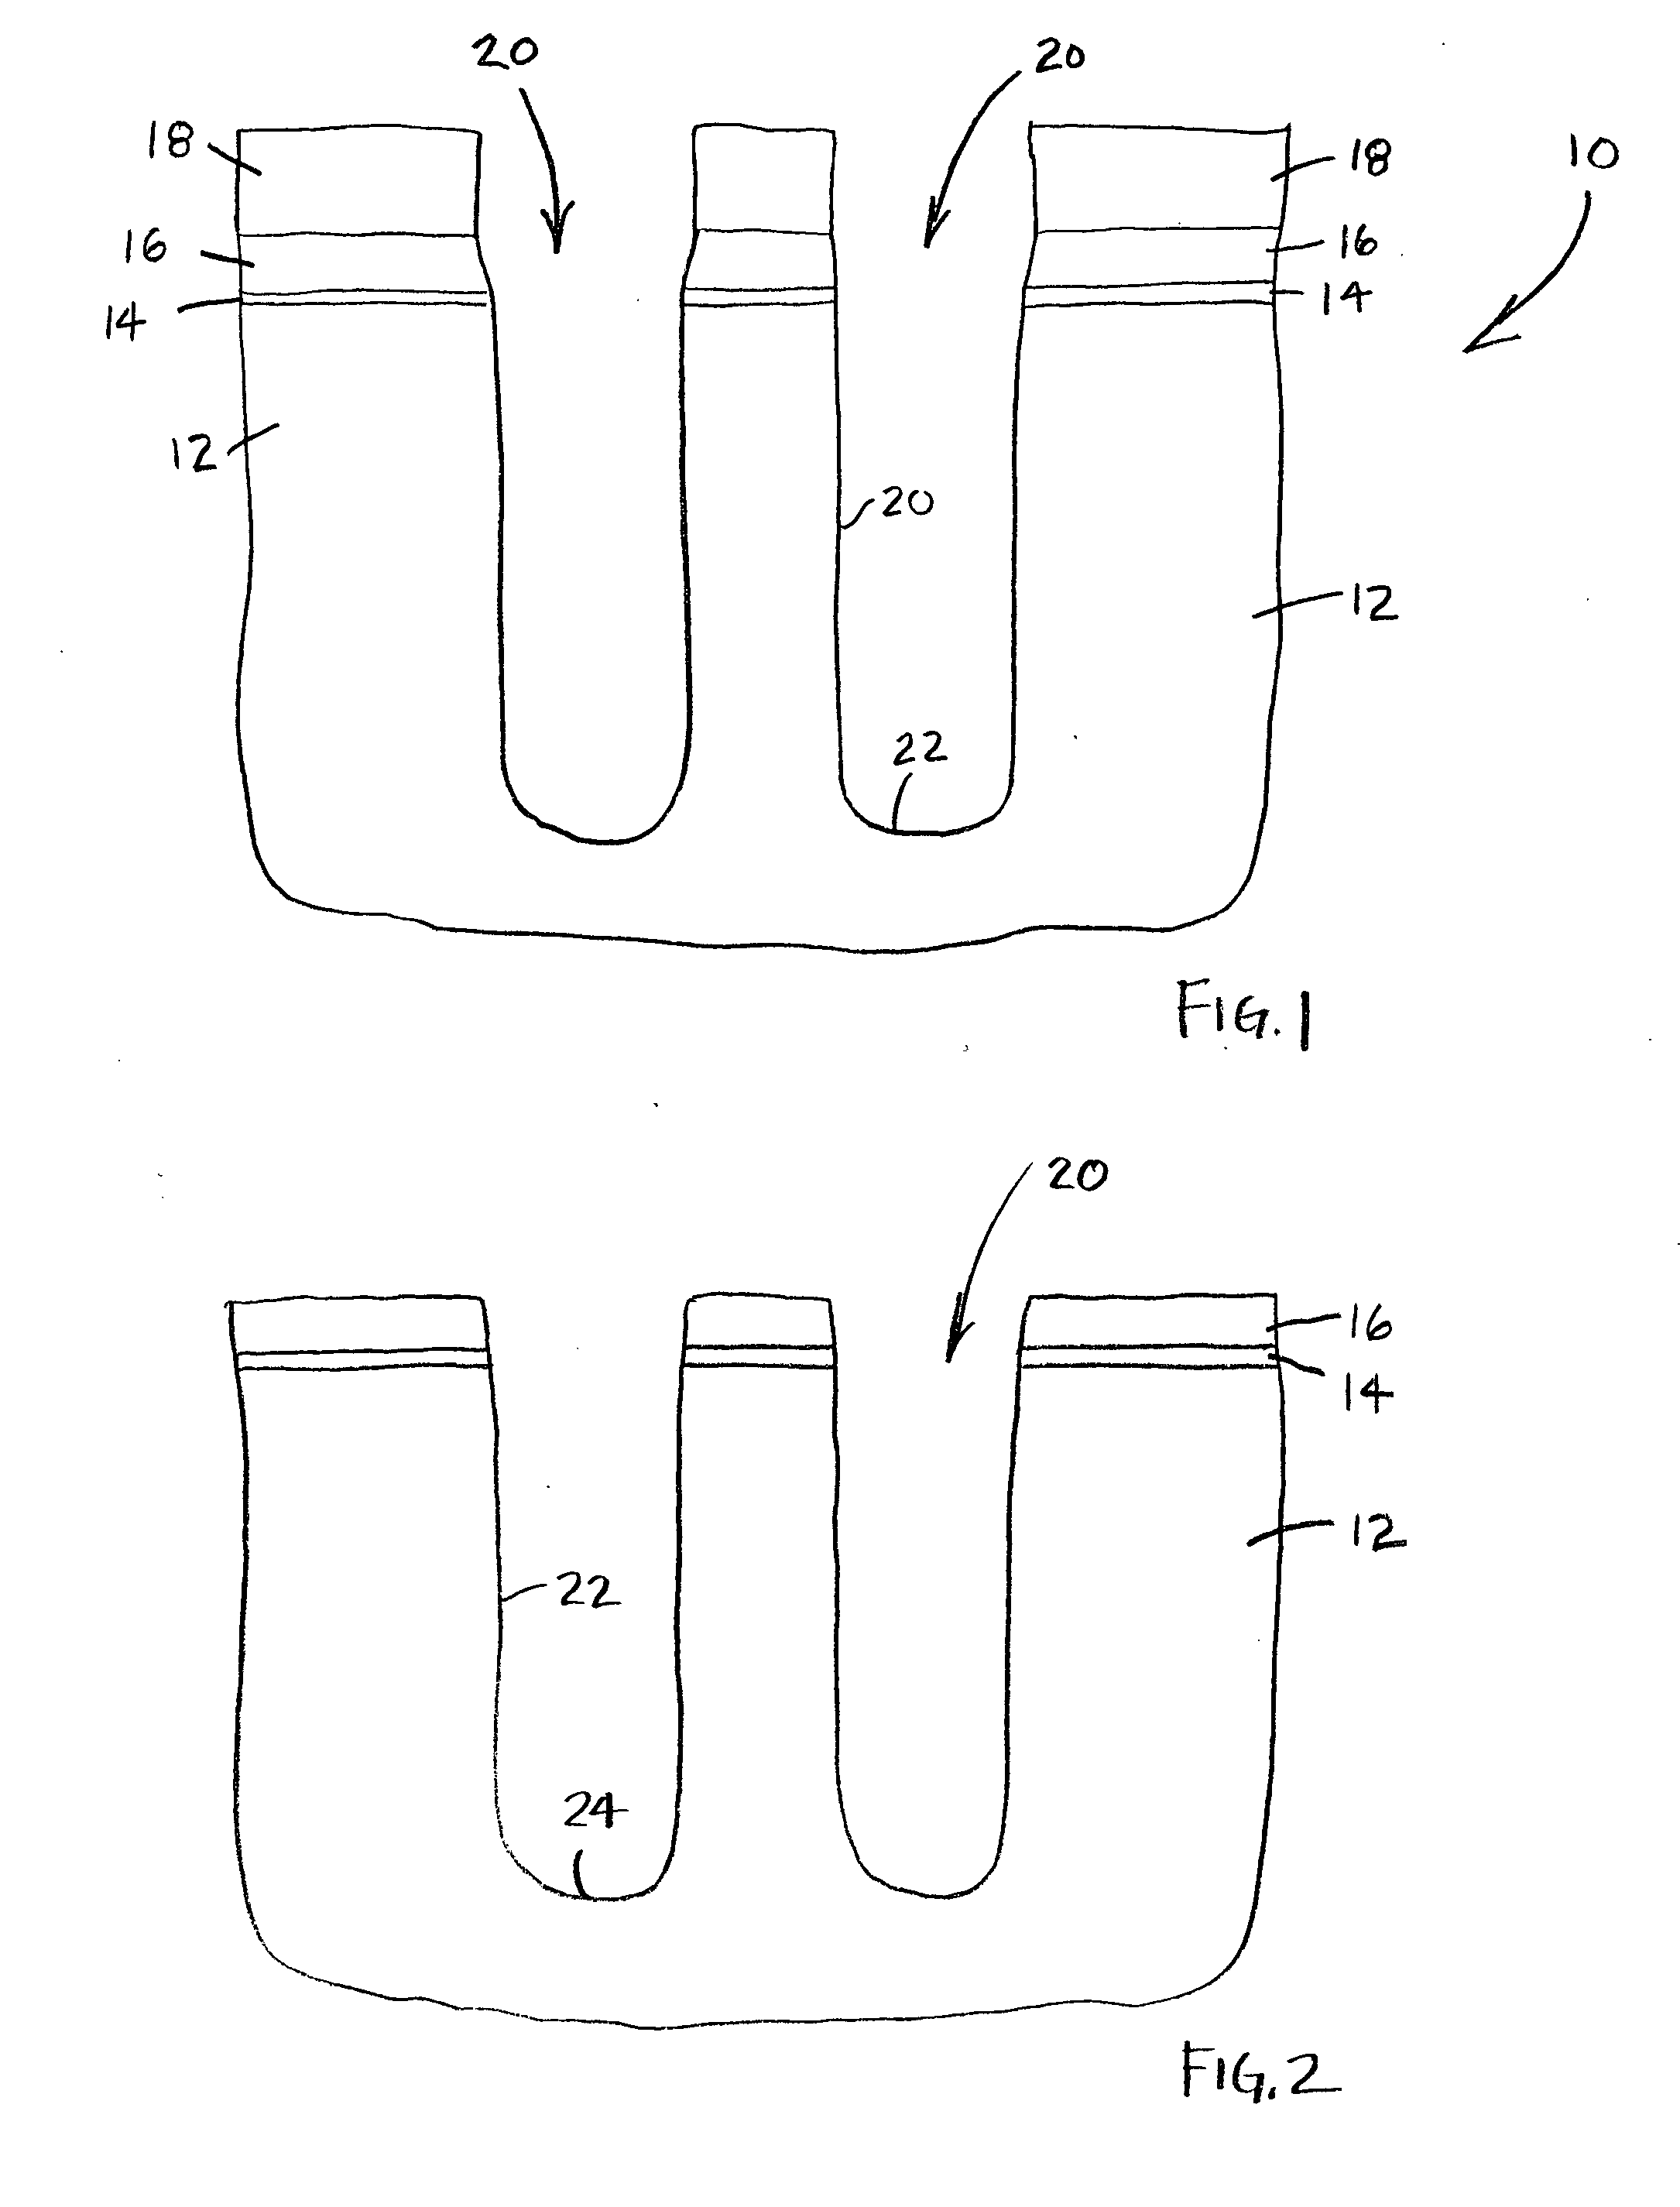 Low temperature process for polysilazane oxidation/densification